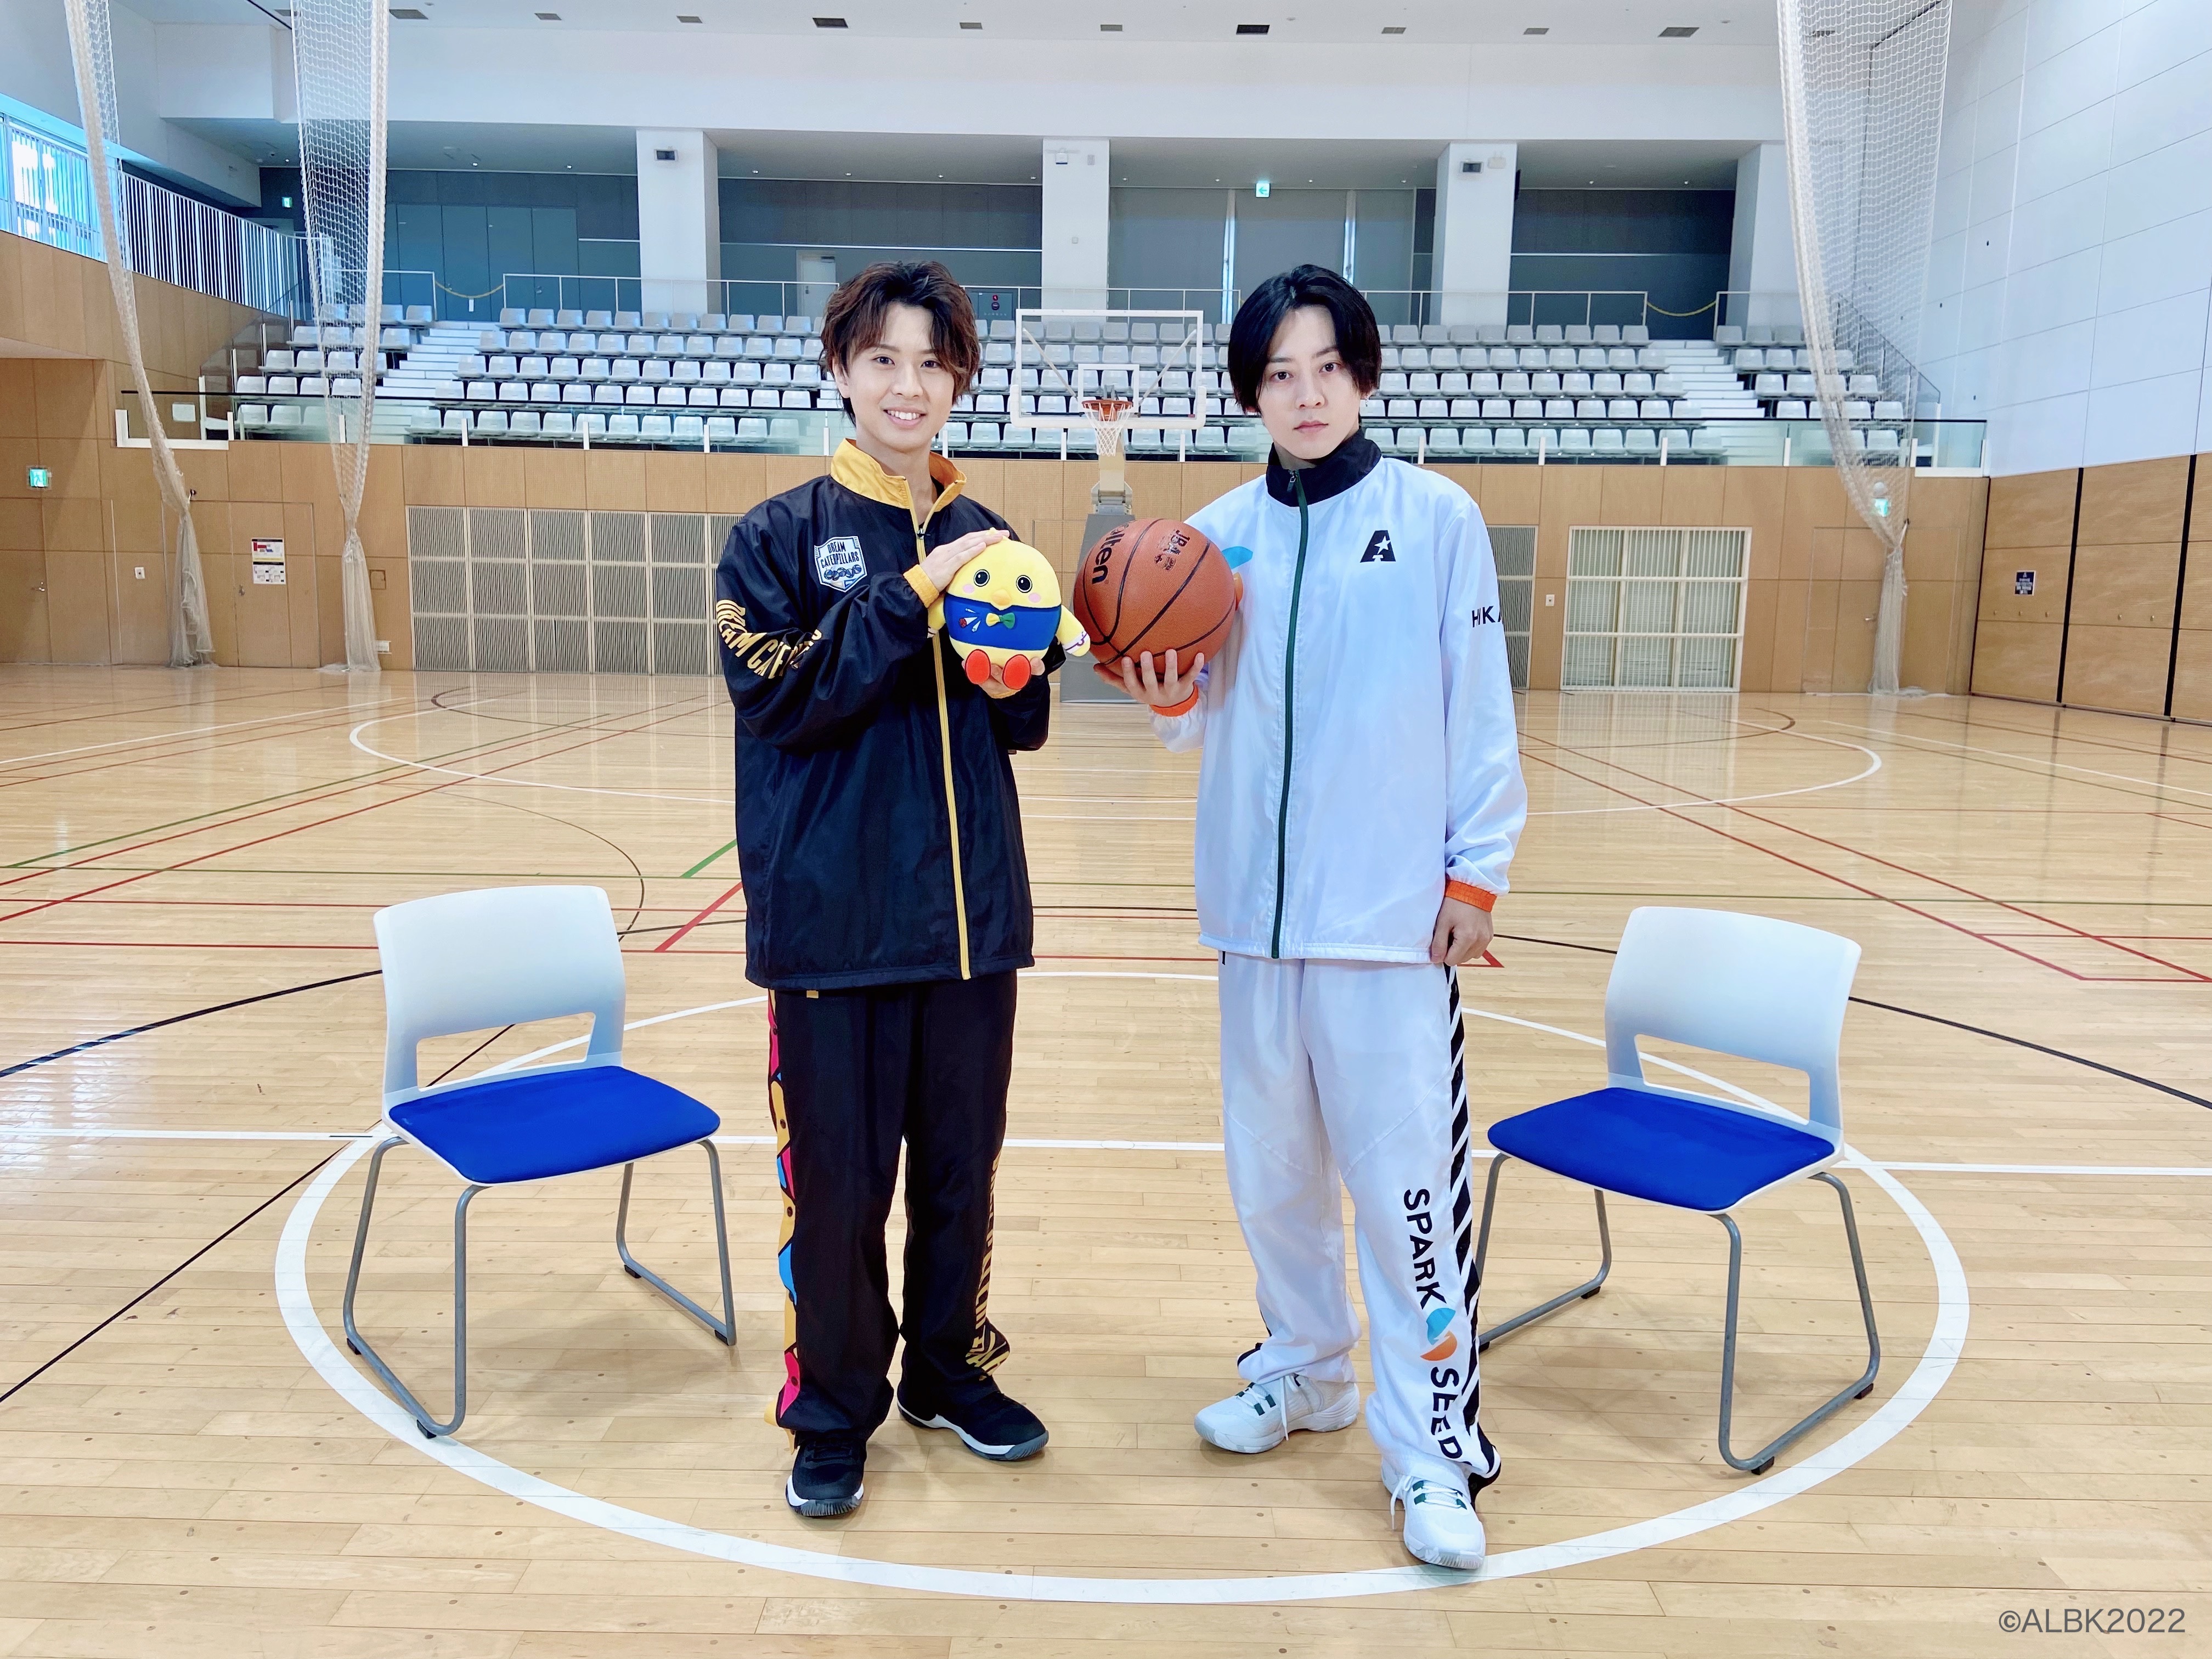 ACTORS LEAGUE in Basketball 2022 Blu-ray